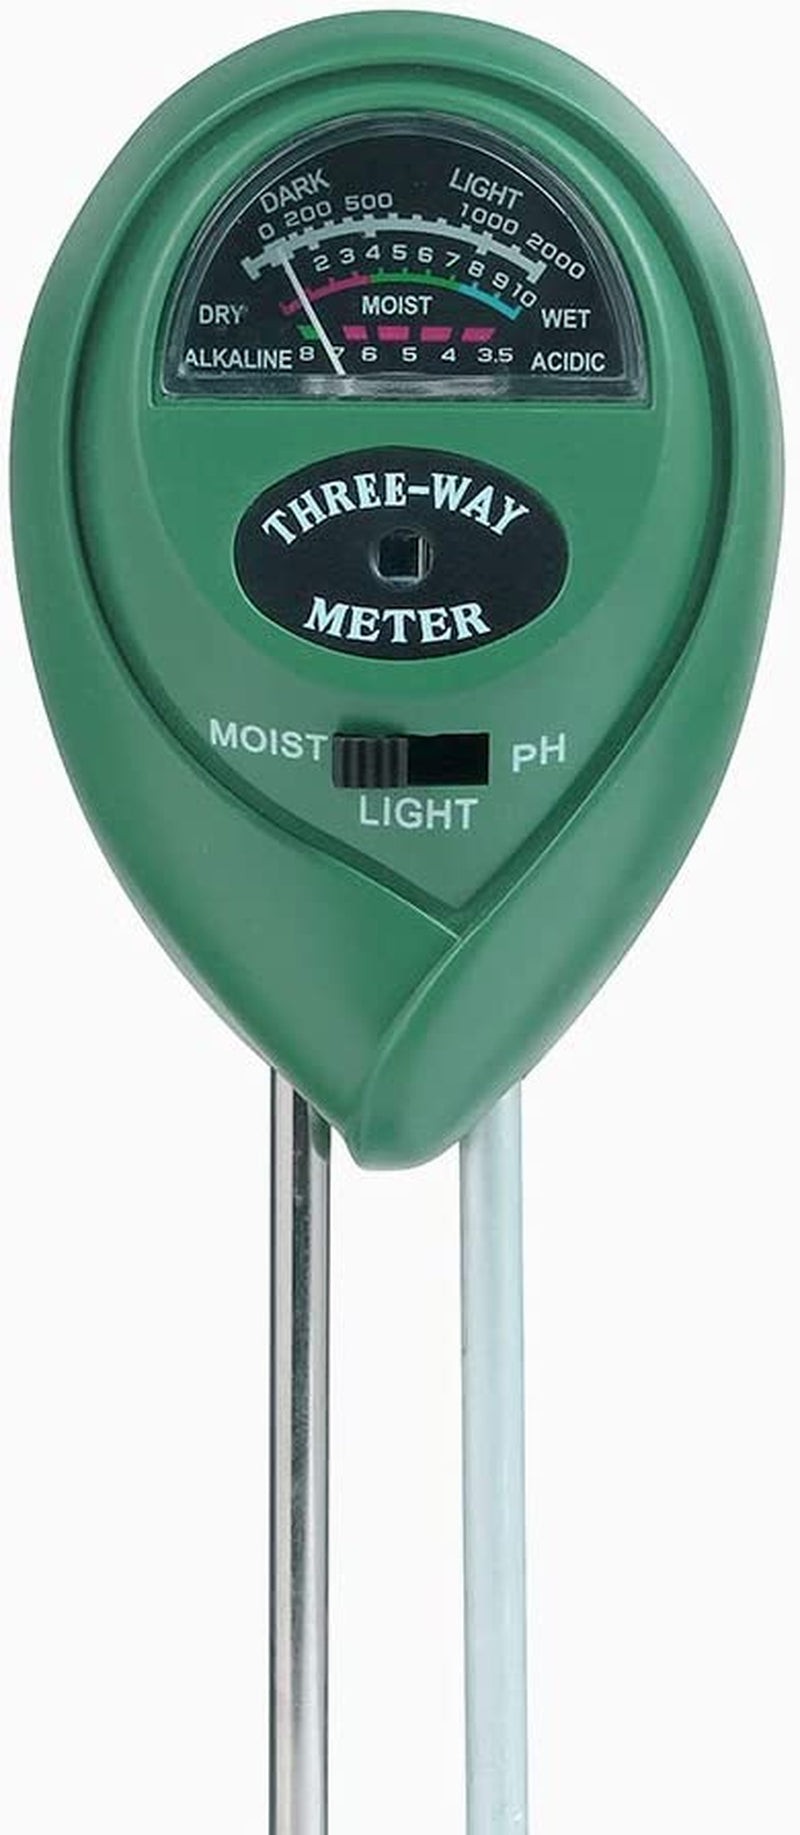 Letuhui, Letuhui 3-In-1 Soil Tester Kits with Moisture,Light and PH Test for Garden,Atree Soil Ph Meter, Farm, Lawn, Indoor & Outdoor (No Battery Needed)…